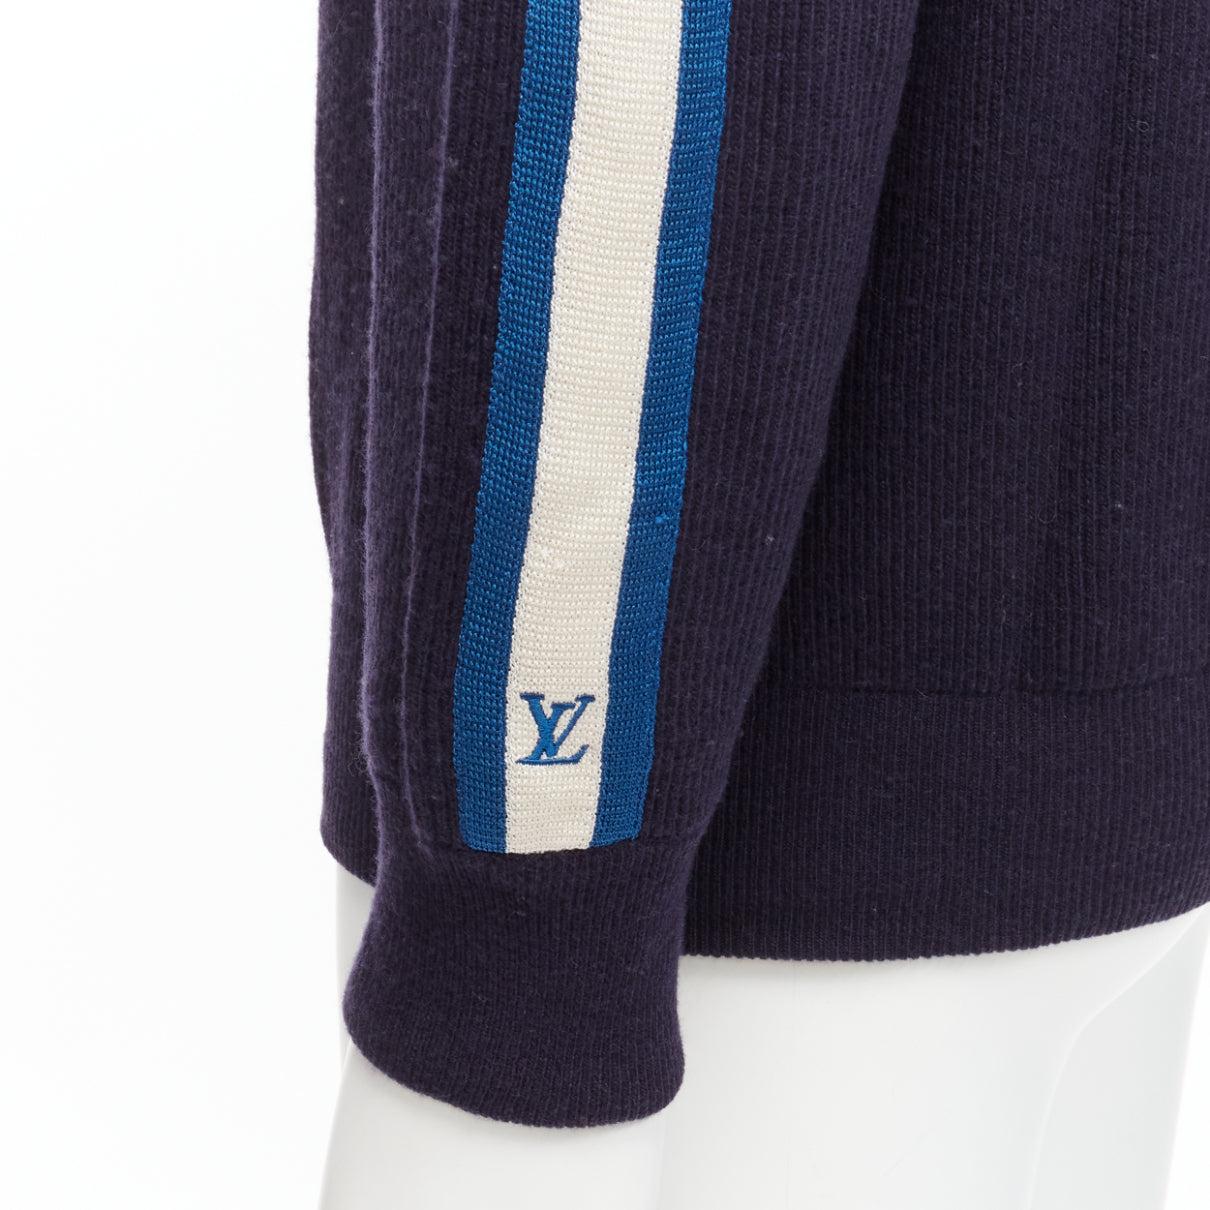 LOUIS VUITTON blue white LV logo trim navy wool cashmere raglan sweater M
Reference: JSLE/A00046
Brand: Louis Vuitton
Material: Wool, Cashmere
Color: Navy, Blue
Pattern: Solid
Closure: Pullover
Extra Details: blue embroidered LV logo on left sleeve